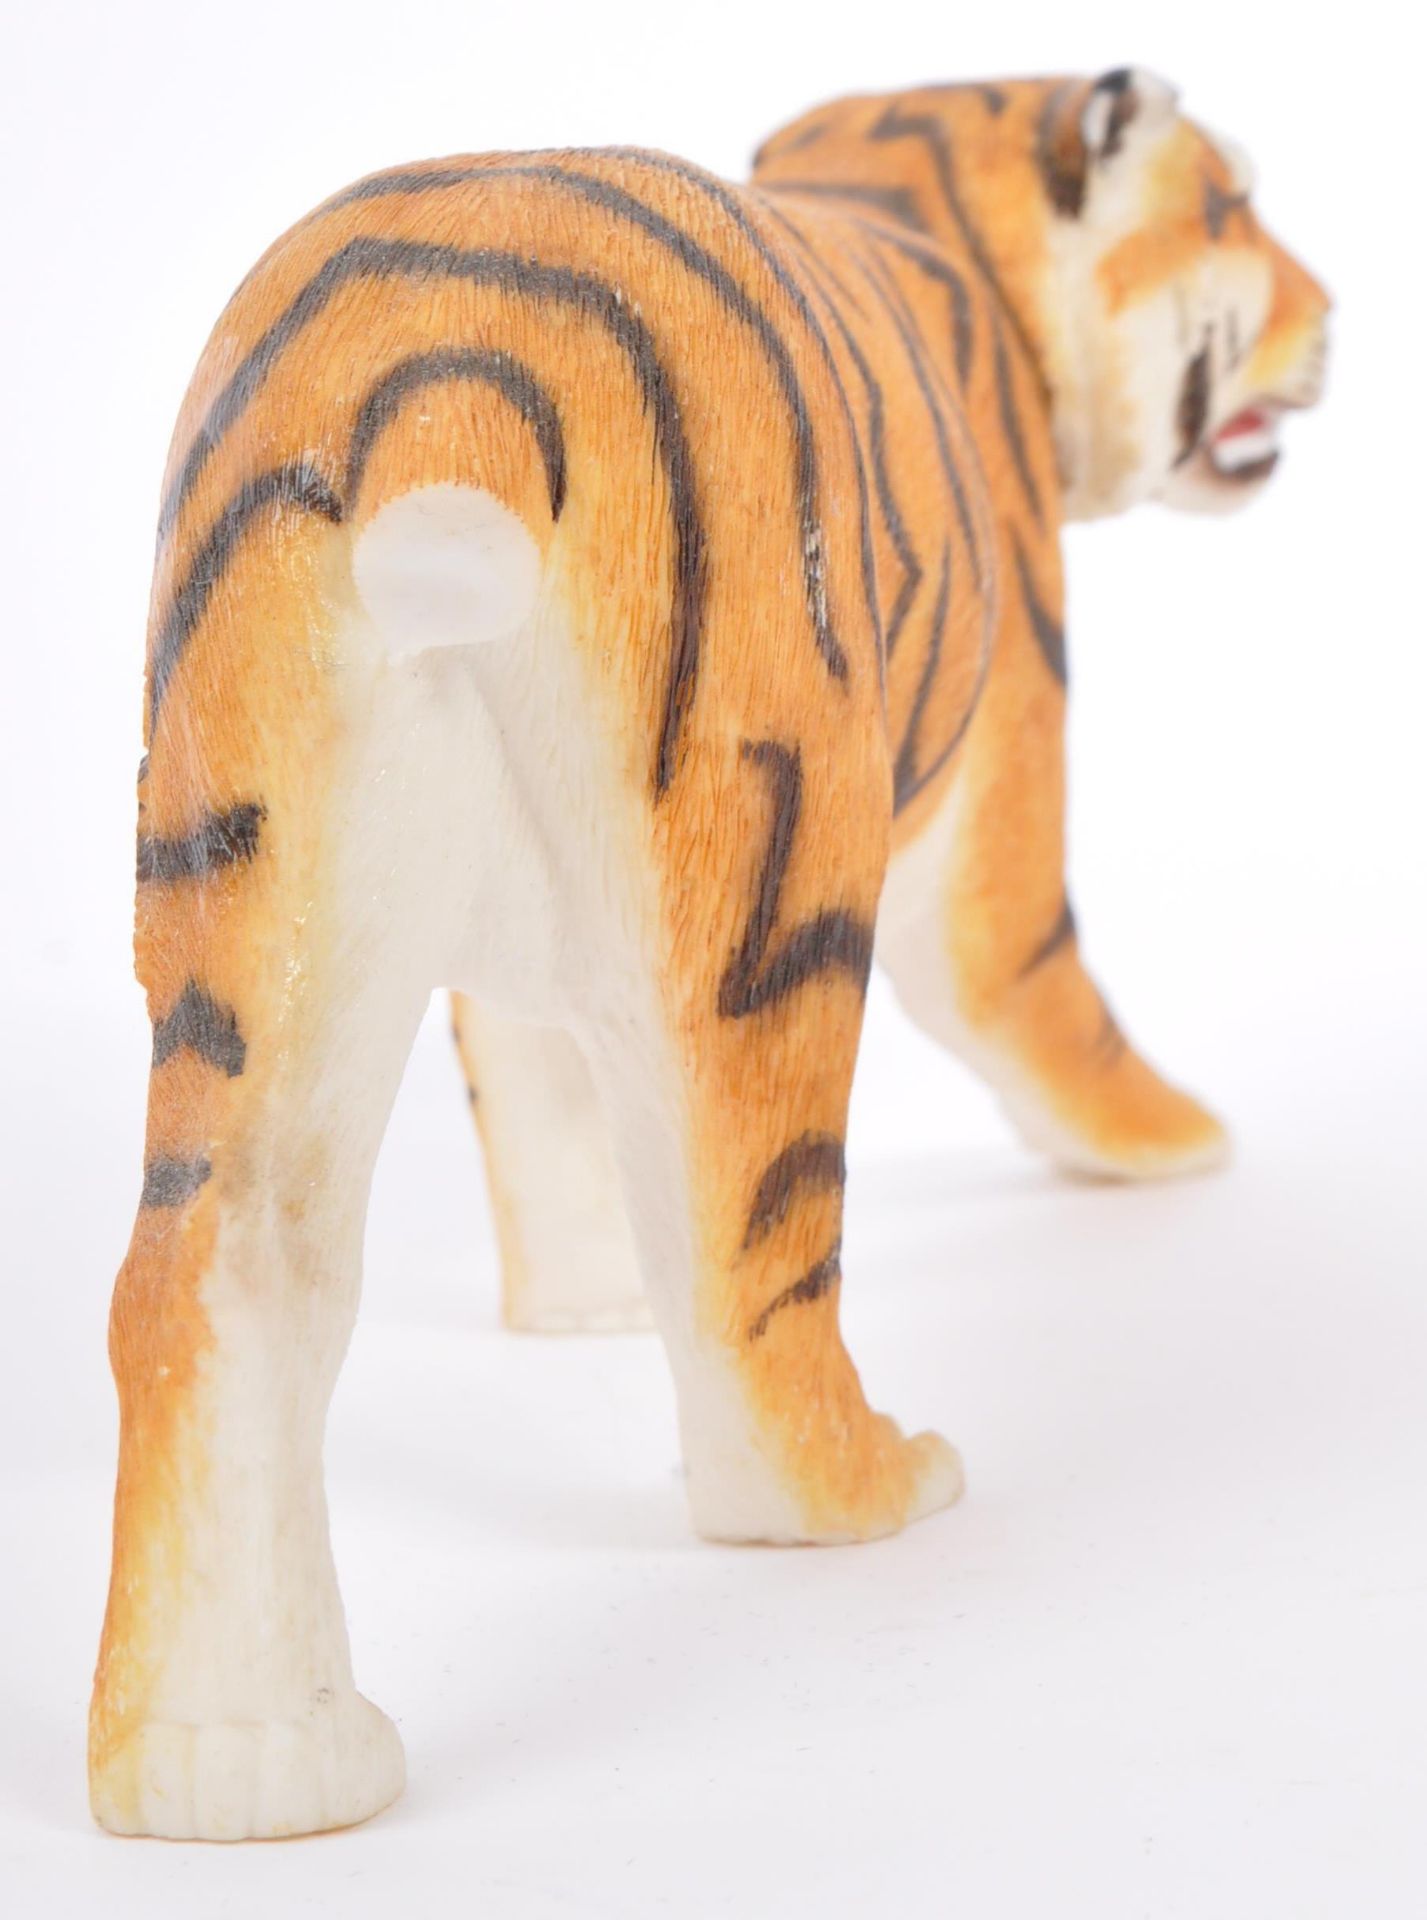 COLLECTION OF OF RESIN TIGER FIGURINES BY THE JULIANA COLLECTION - Image 12 of 13